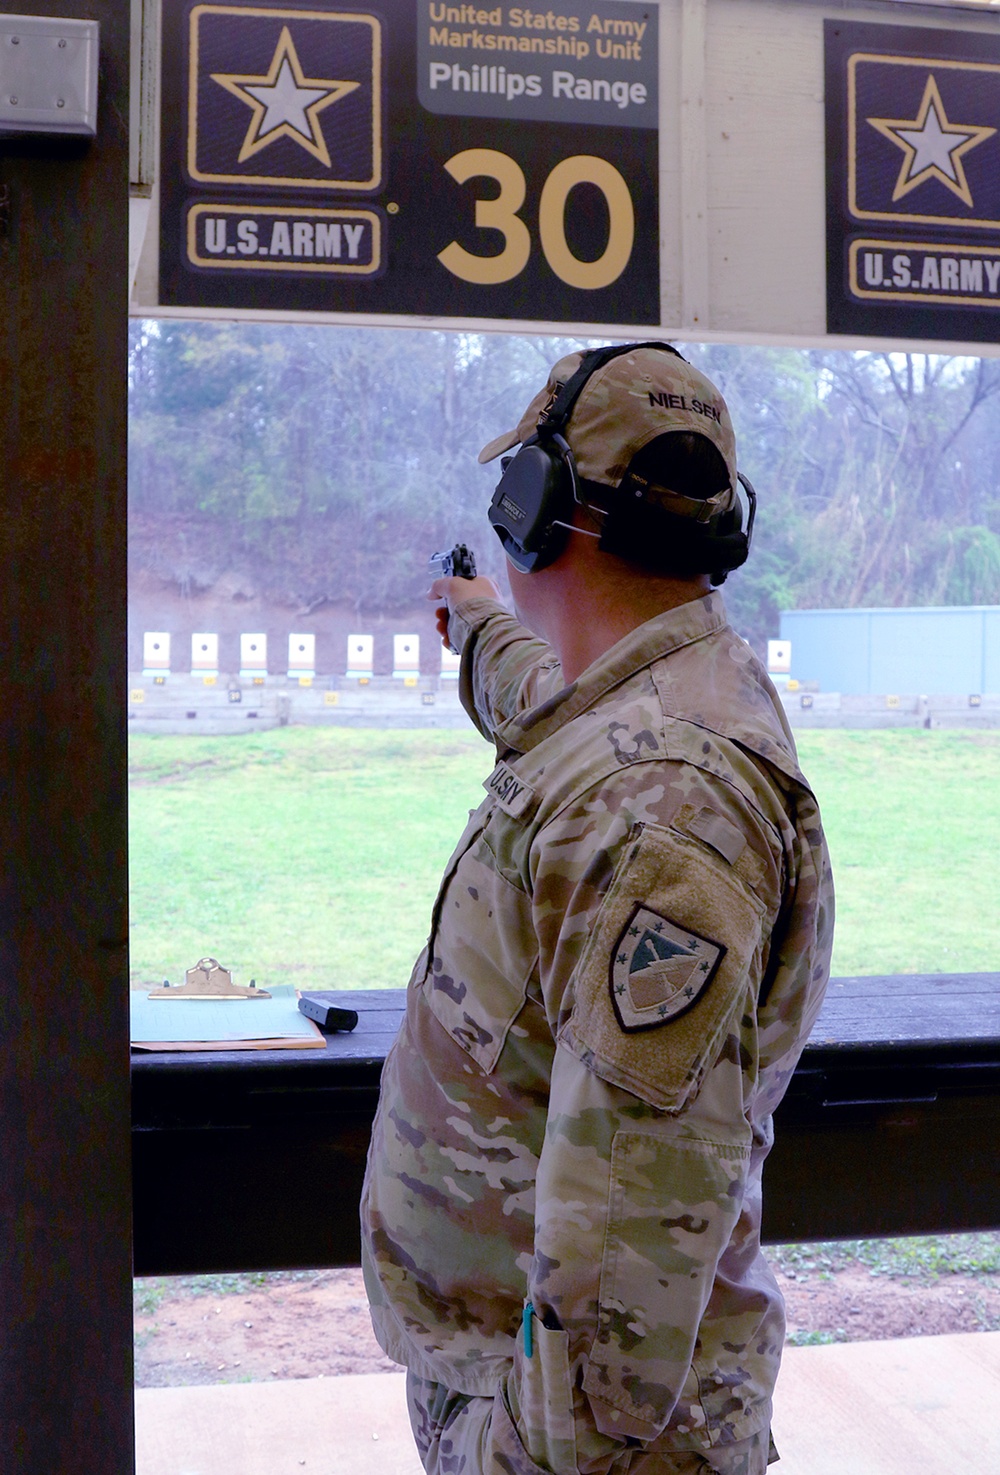 29th Infantry Division Soldier competes in 2018 All Army Championships